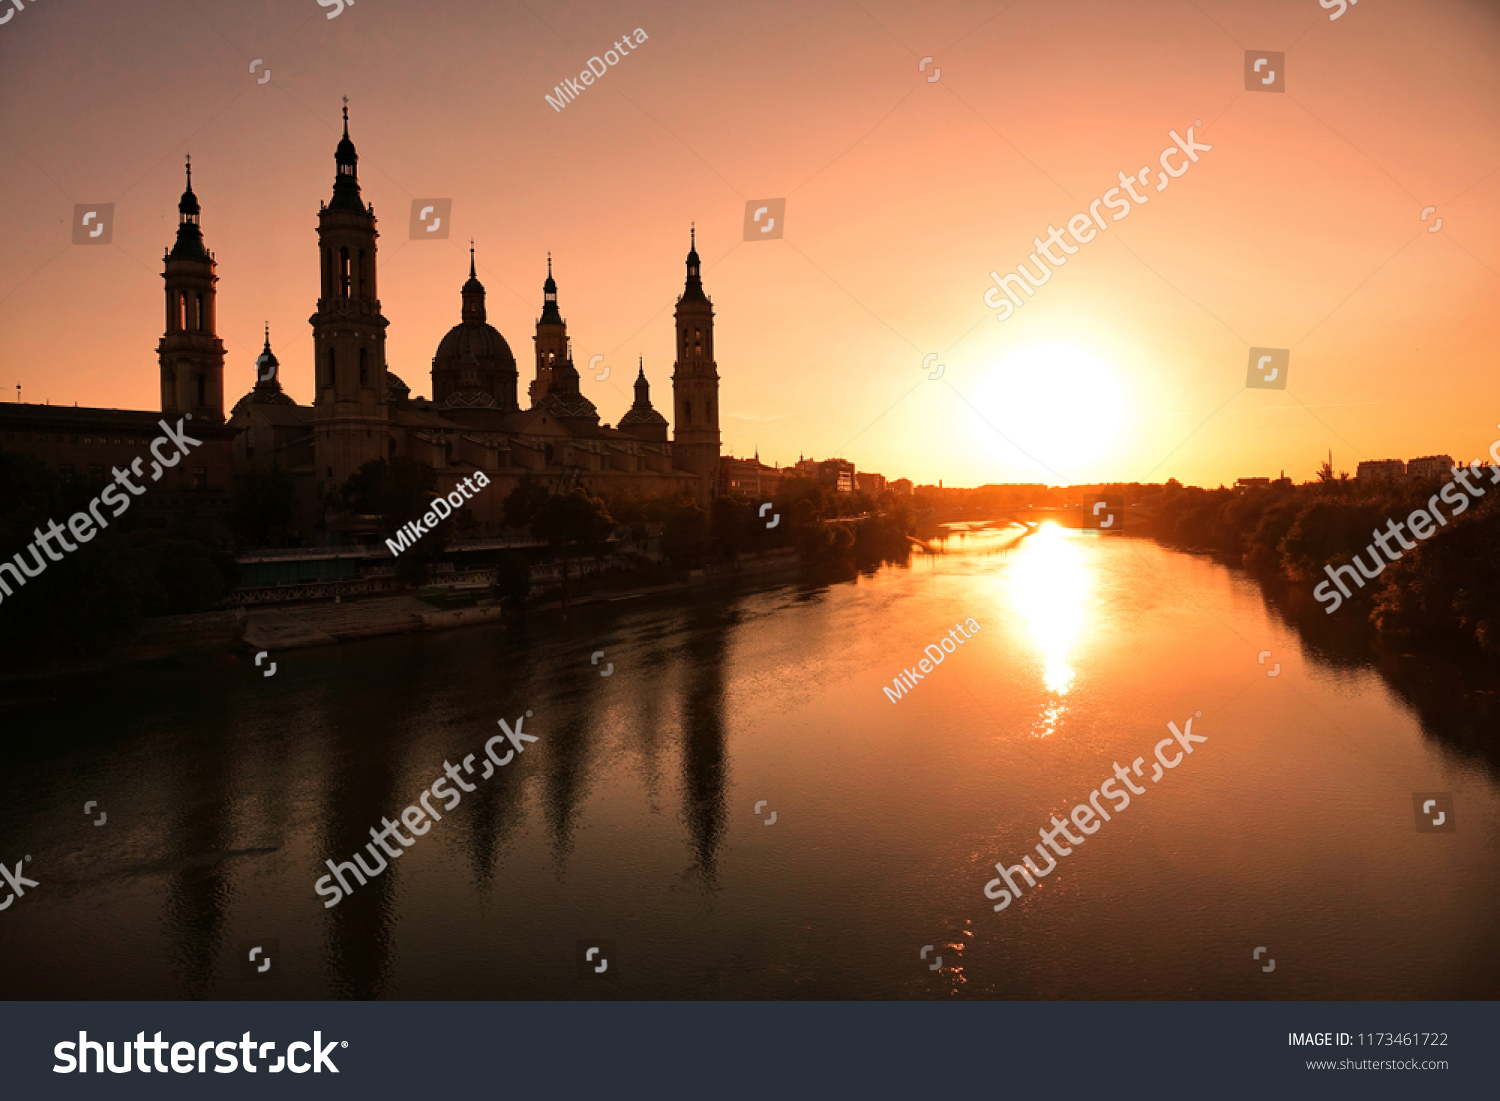 The Cathedral-Basilica of Our Lady of the Pillar and Ebor River at Sunset #1173461722